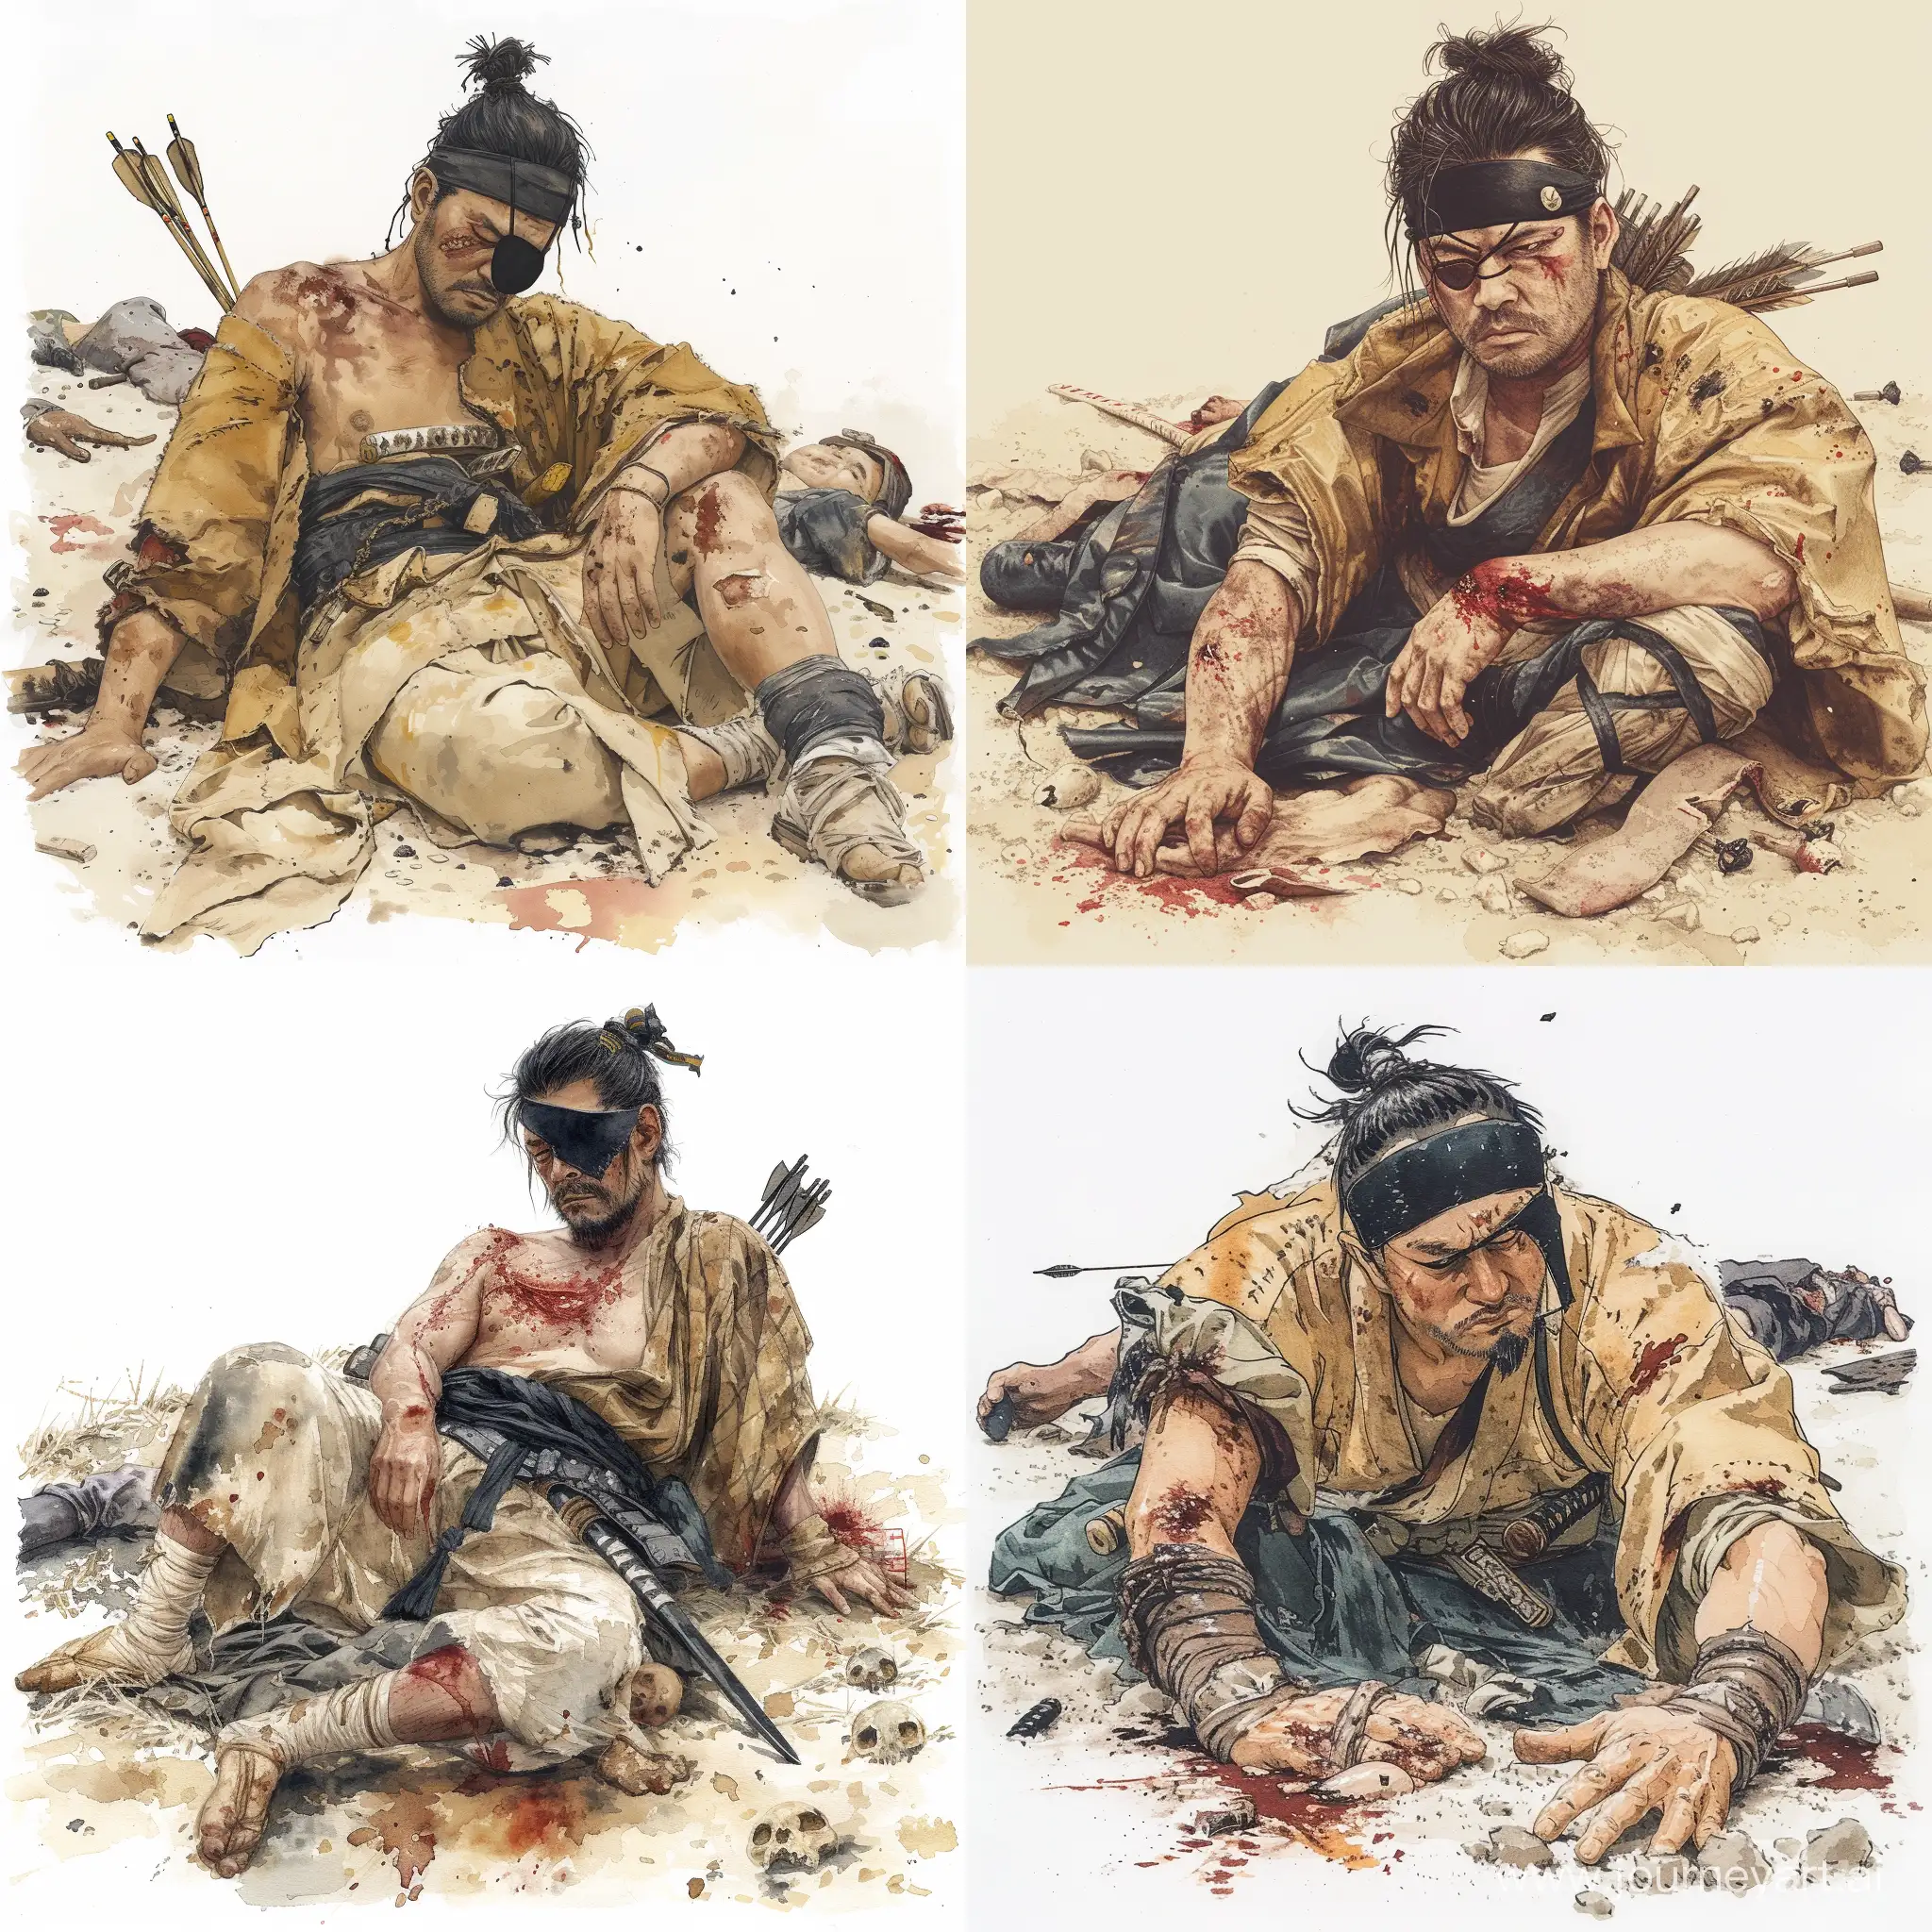 Wounded-Japanese-Warrior-Resting-PostBattle-Scene-with-Luxury-Garments-and-Watercolor-Style